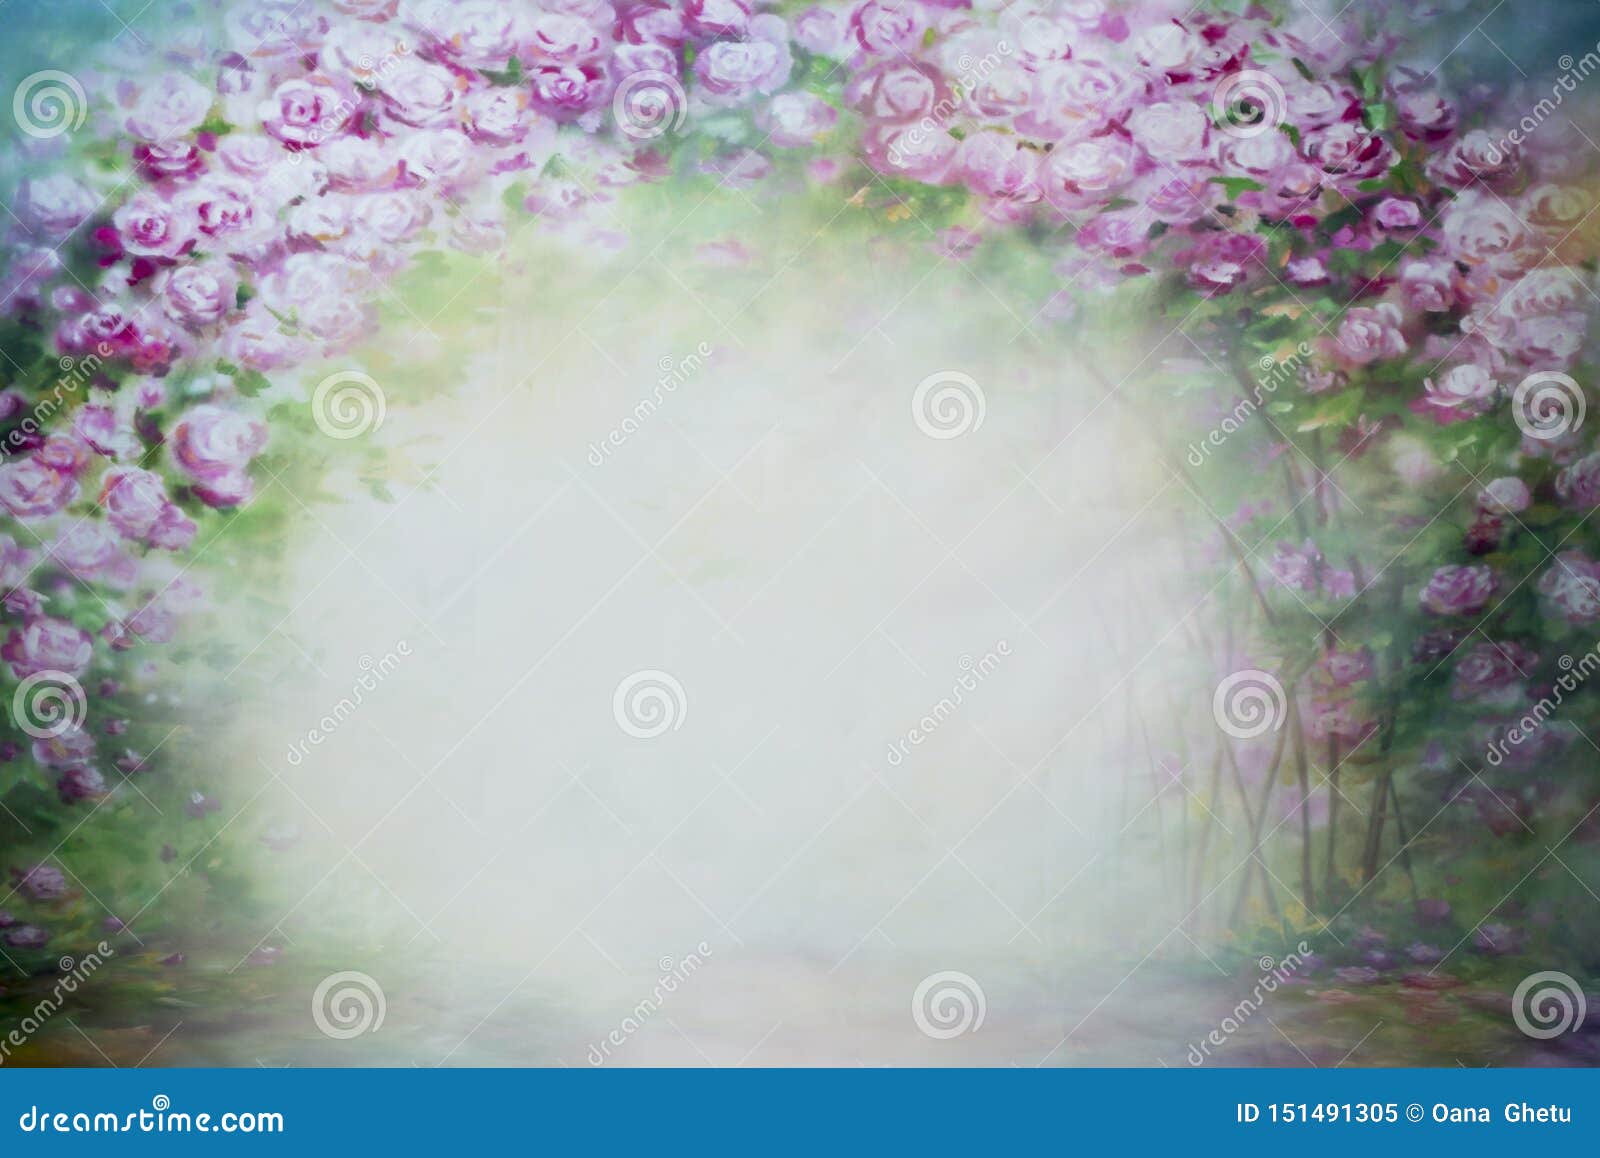 Background for Kids Photo Shootings with Flowers Stock Image - Image of  imagination, pink: 151491305